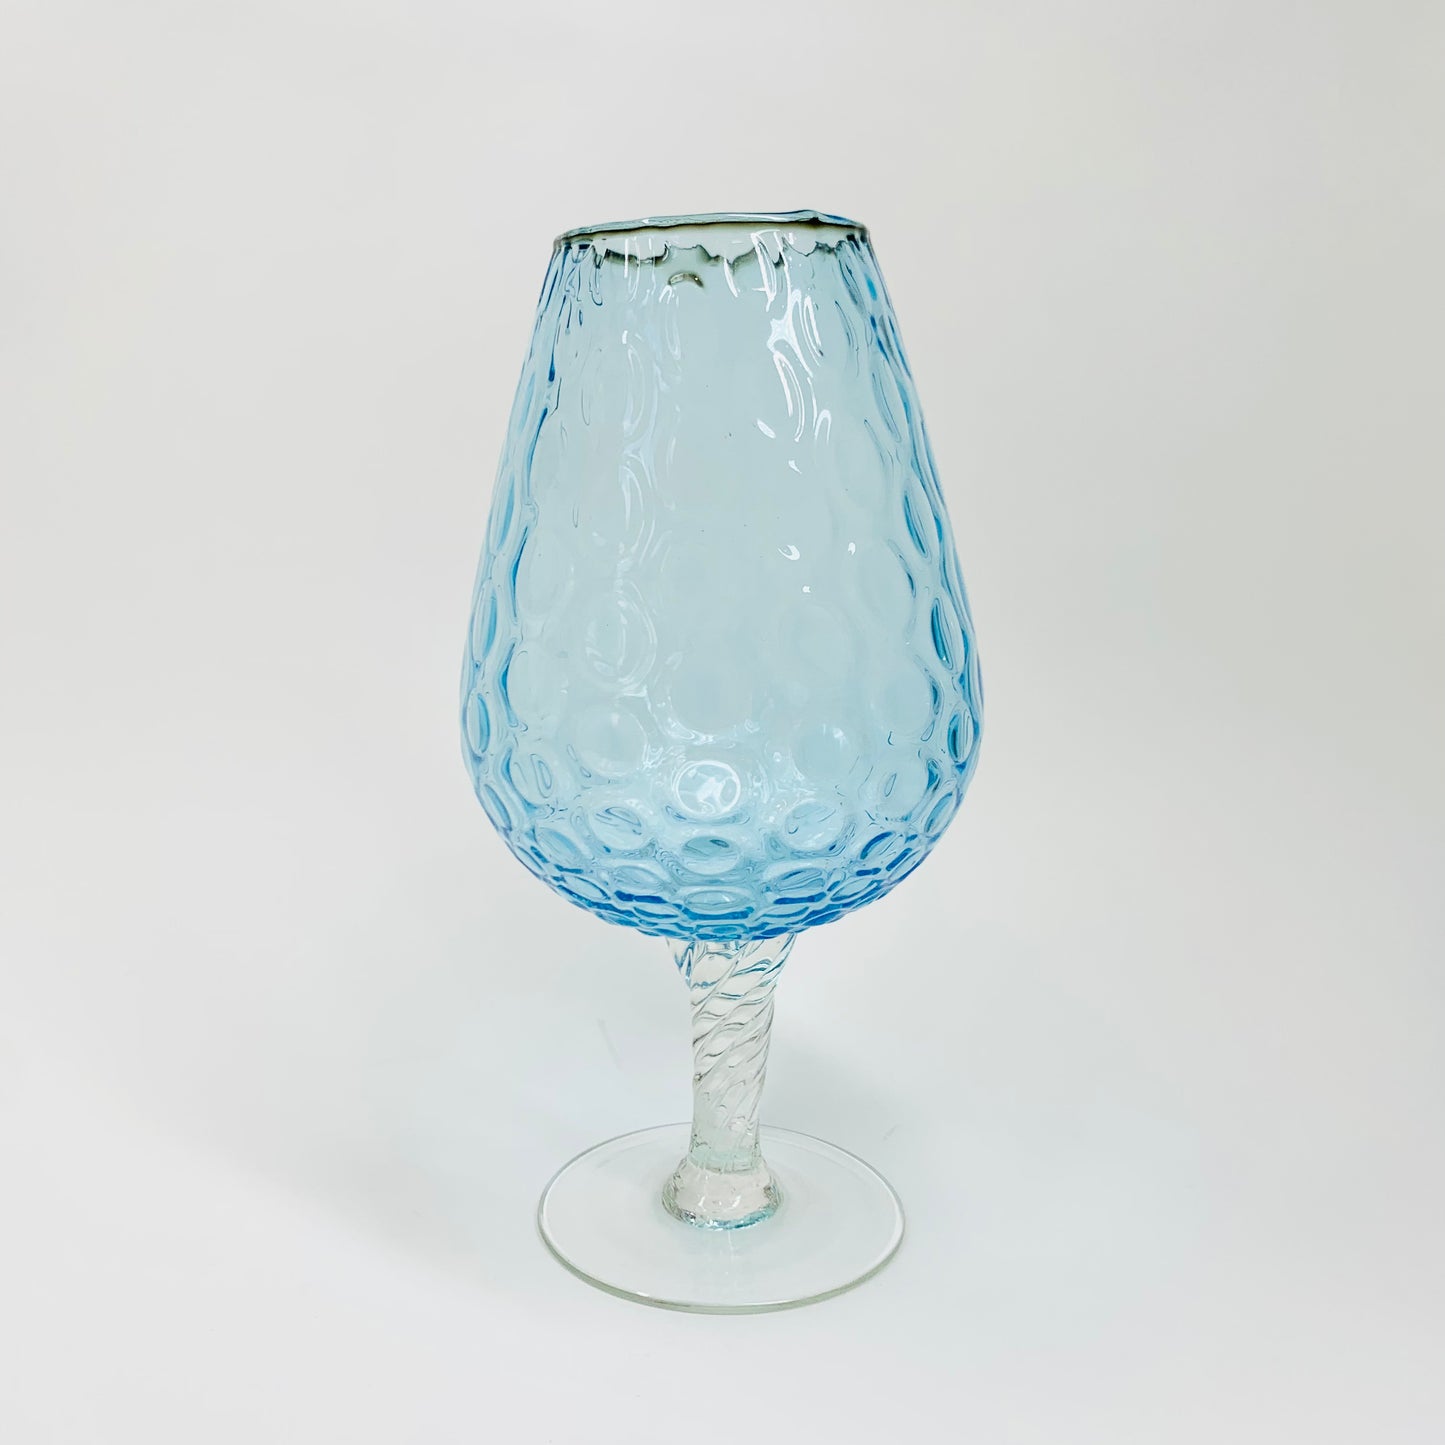 Midcentury Italian dimpled blue glass brandy balloon vase with clear stem